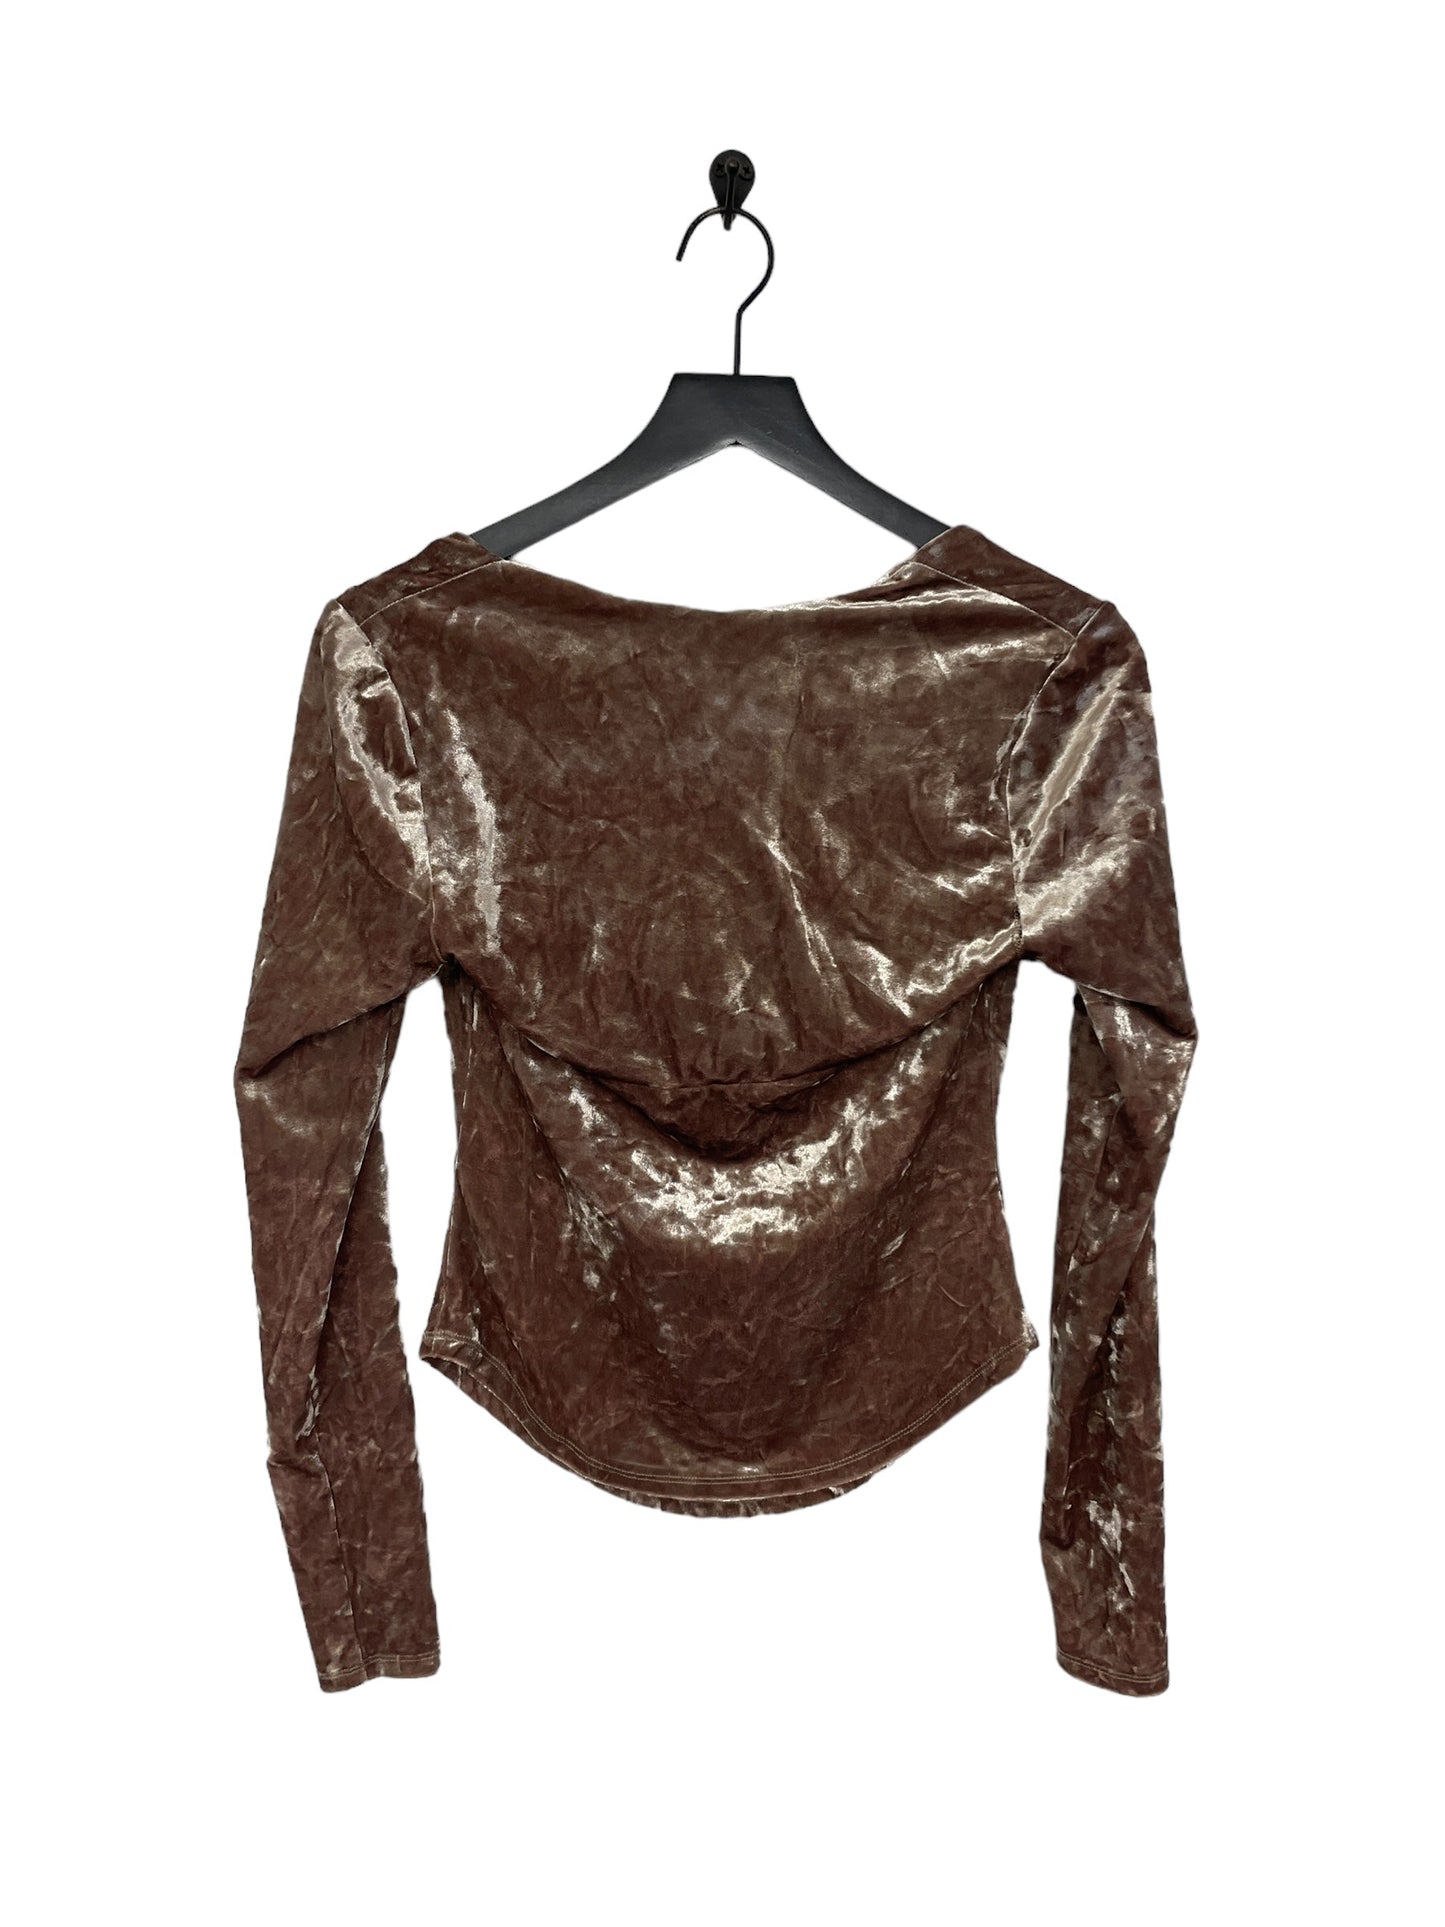 Brown Top Long Sleeve Free People, Size Xs